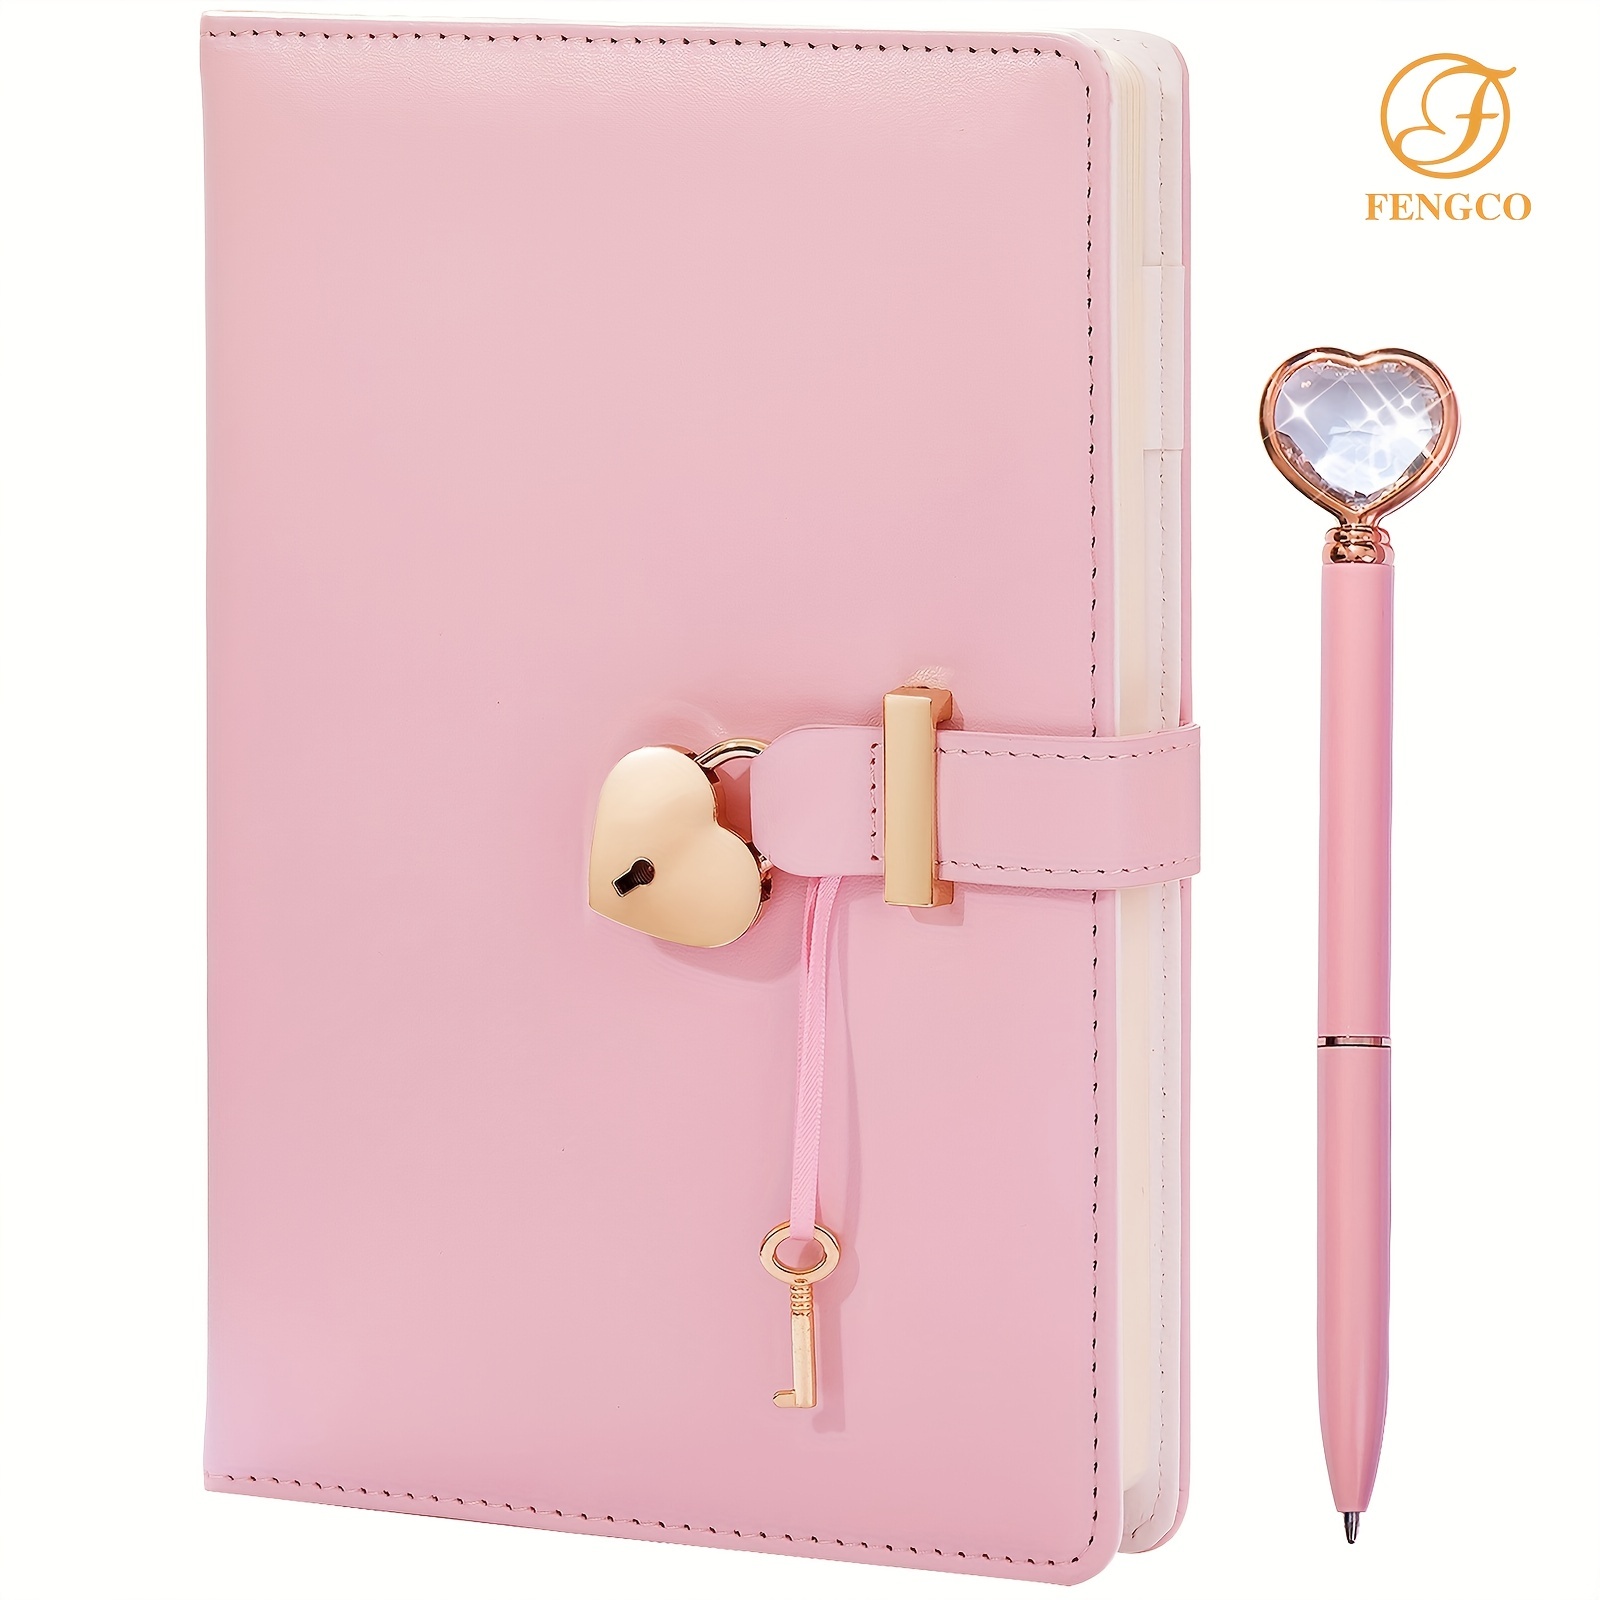 Girls Diary with Lock and Key for Girls Secret Kids Journals for Girls Pink  Heart Locking Journal Faux Leather Gold Lined Notebook